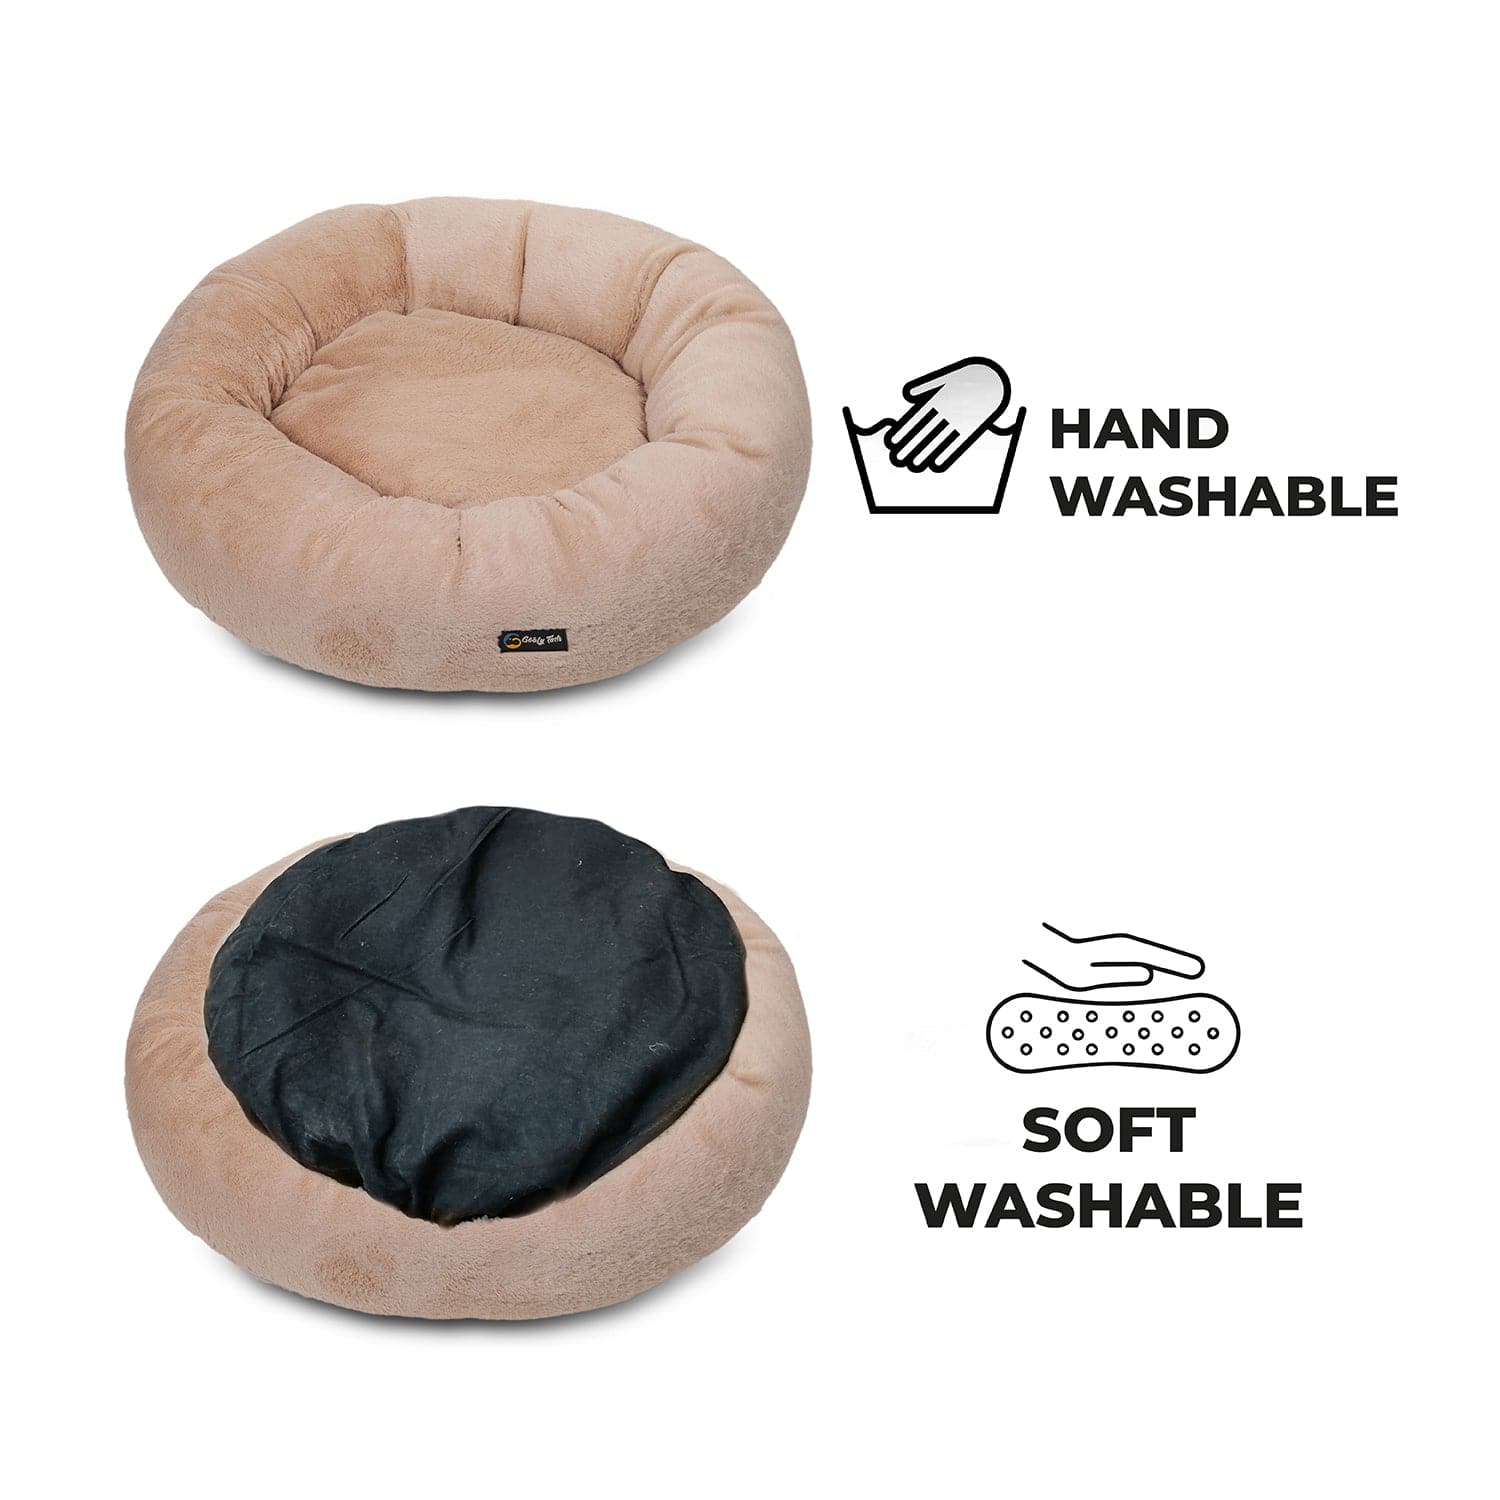 Goofy Tails Donut Sleeping Bed for Dogs with Super Premium Fabric | Luxurious Anti-Anxiety Snuggle Round Dog Bed (Beige) (7642579304598)